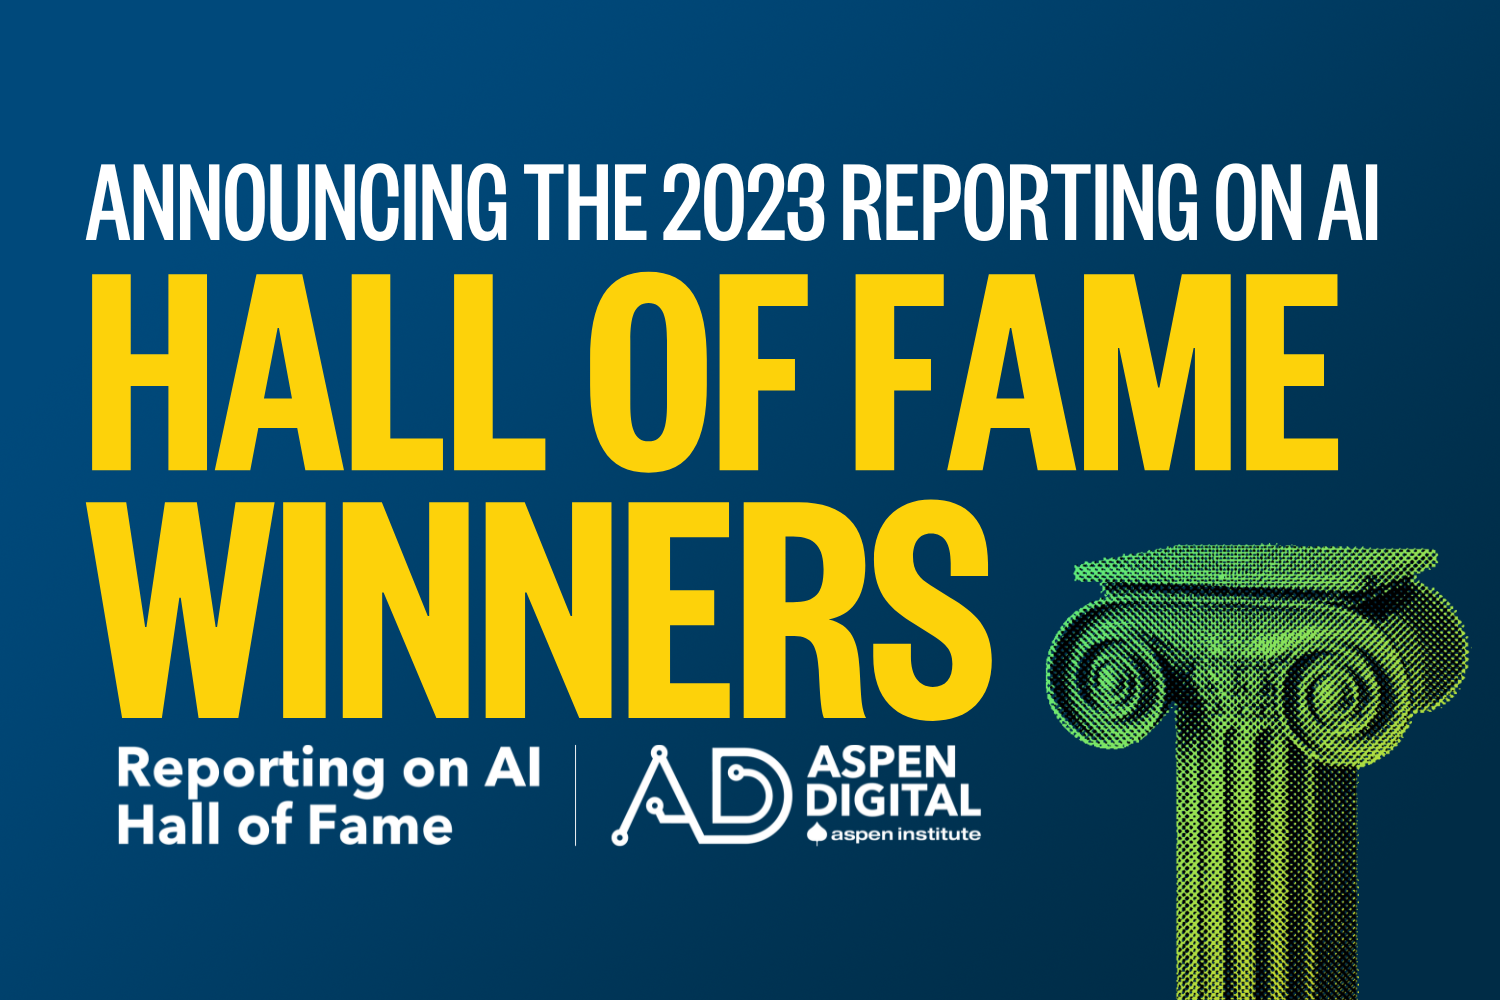 Announcing the 2023 Reporting on AI Hall of Fame Winners